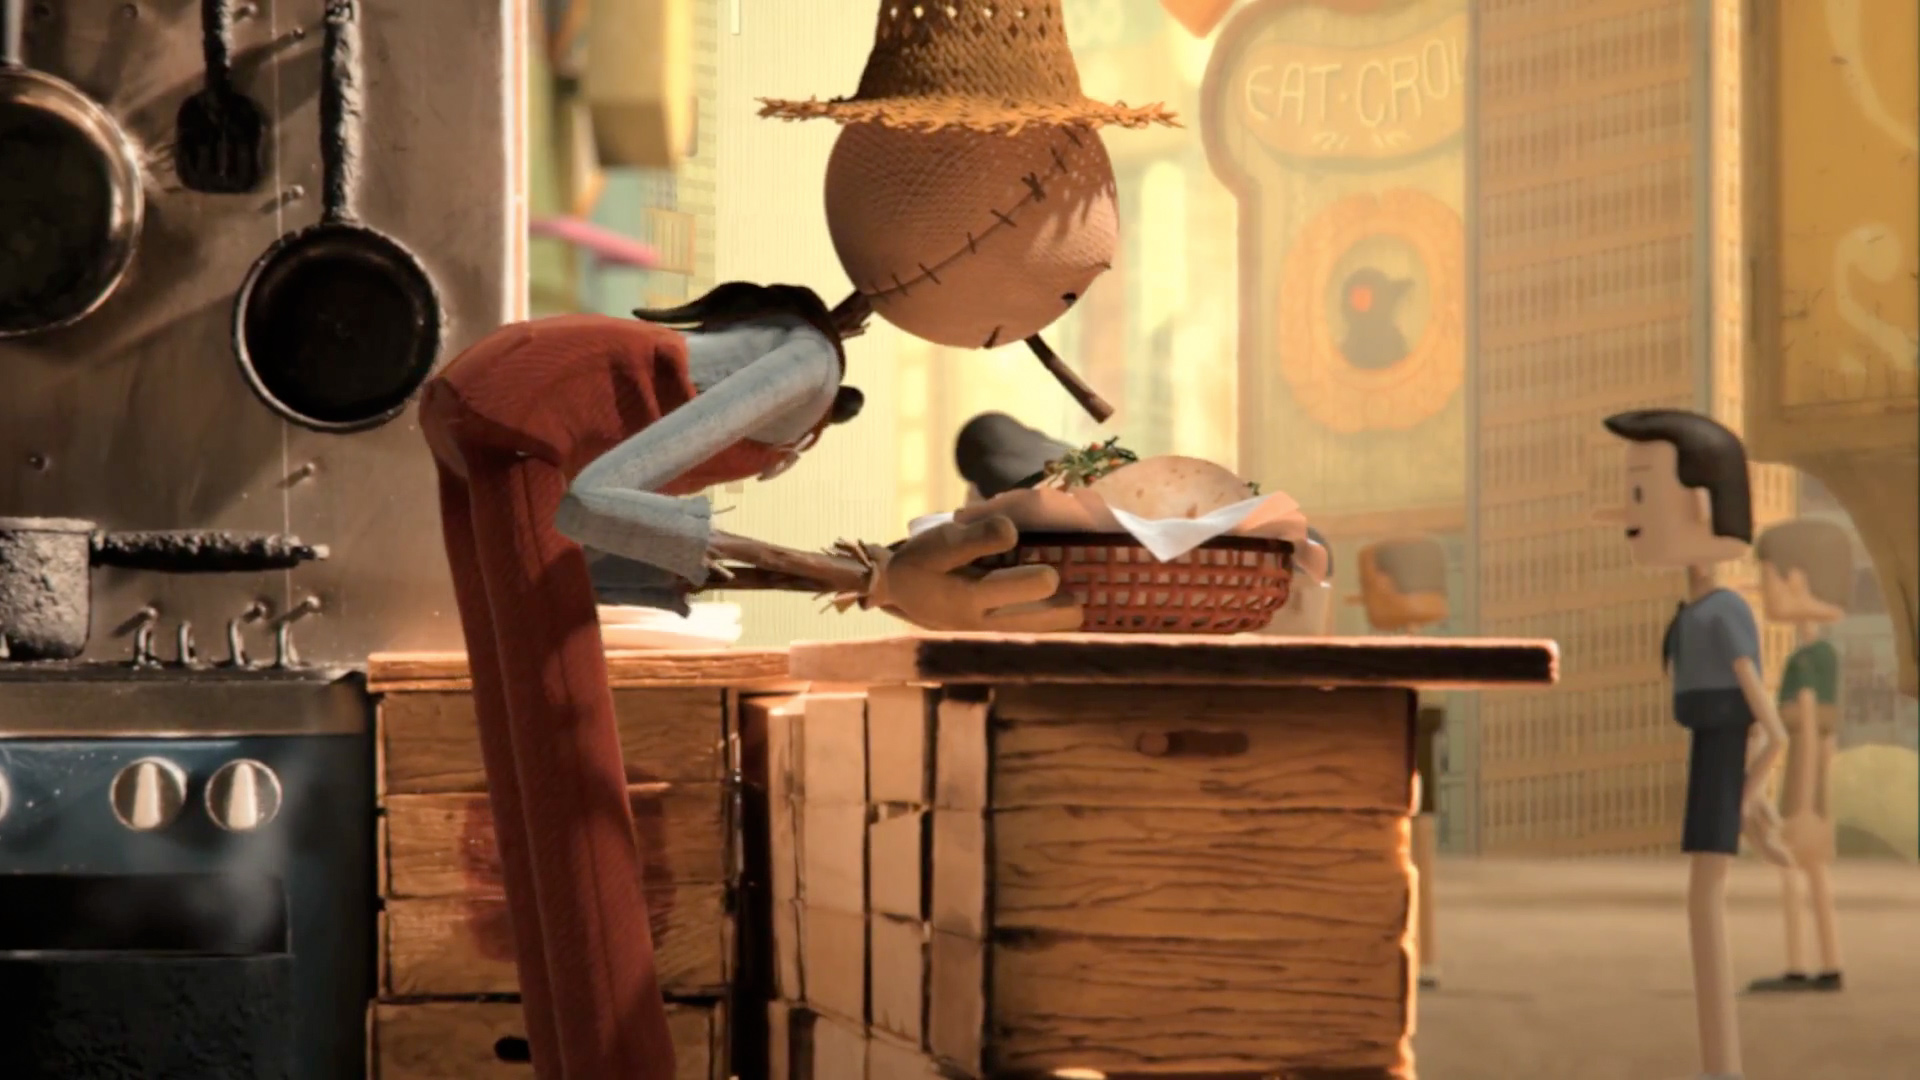 chipotle-creates-great-animated-short-film-the-scarecrow-22.jpg